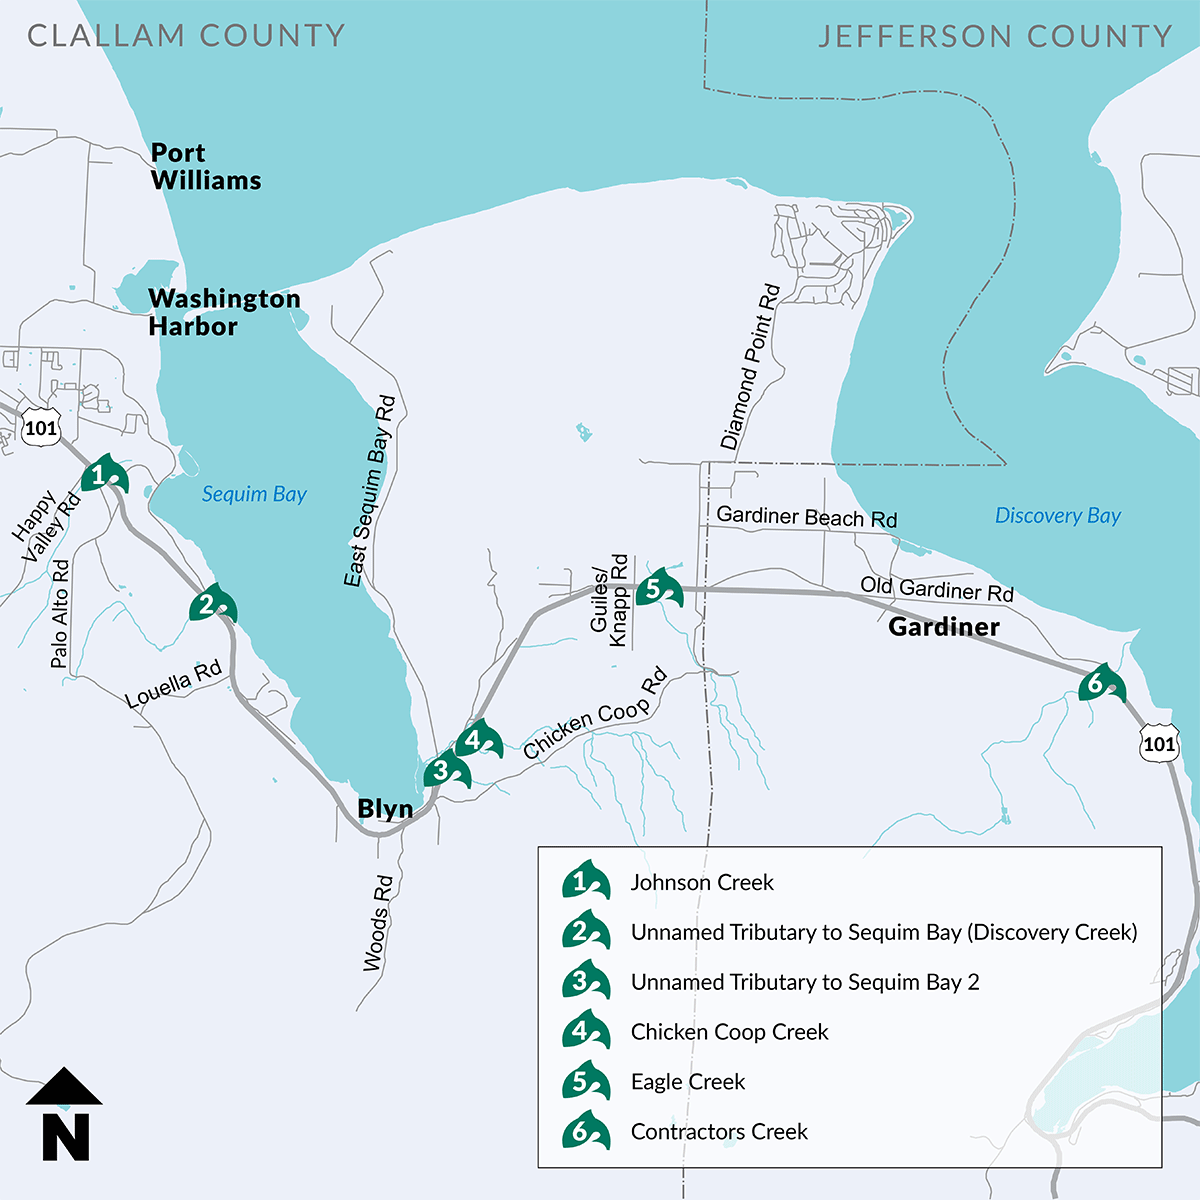 Map showing the location of US 101 - Jefferson and Clallam Counties fish passage projects